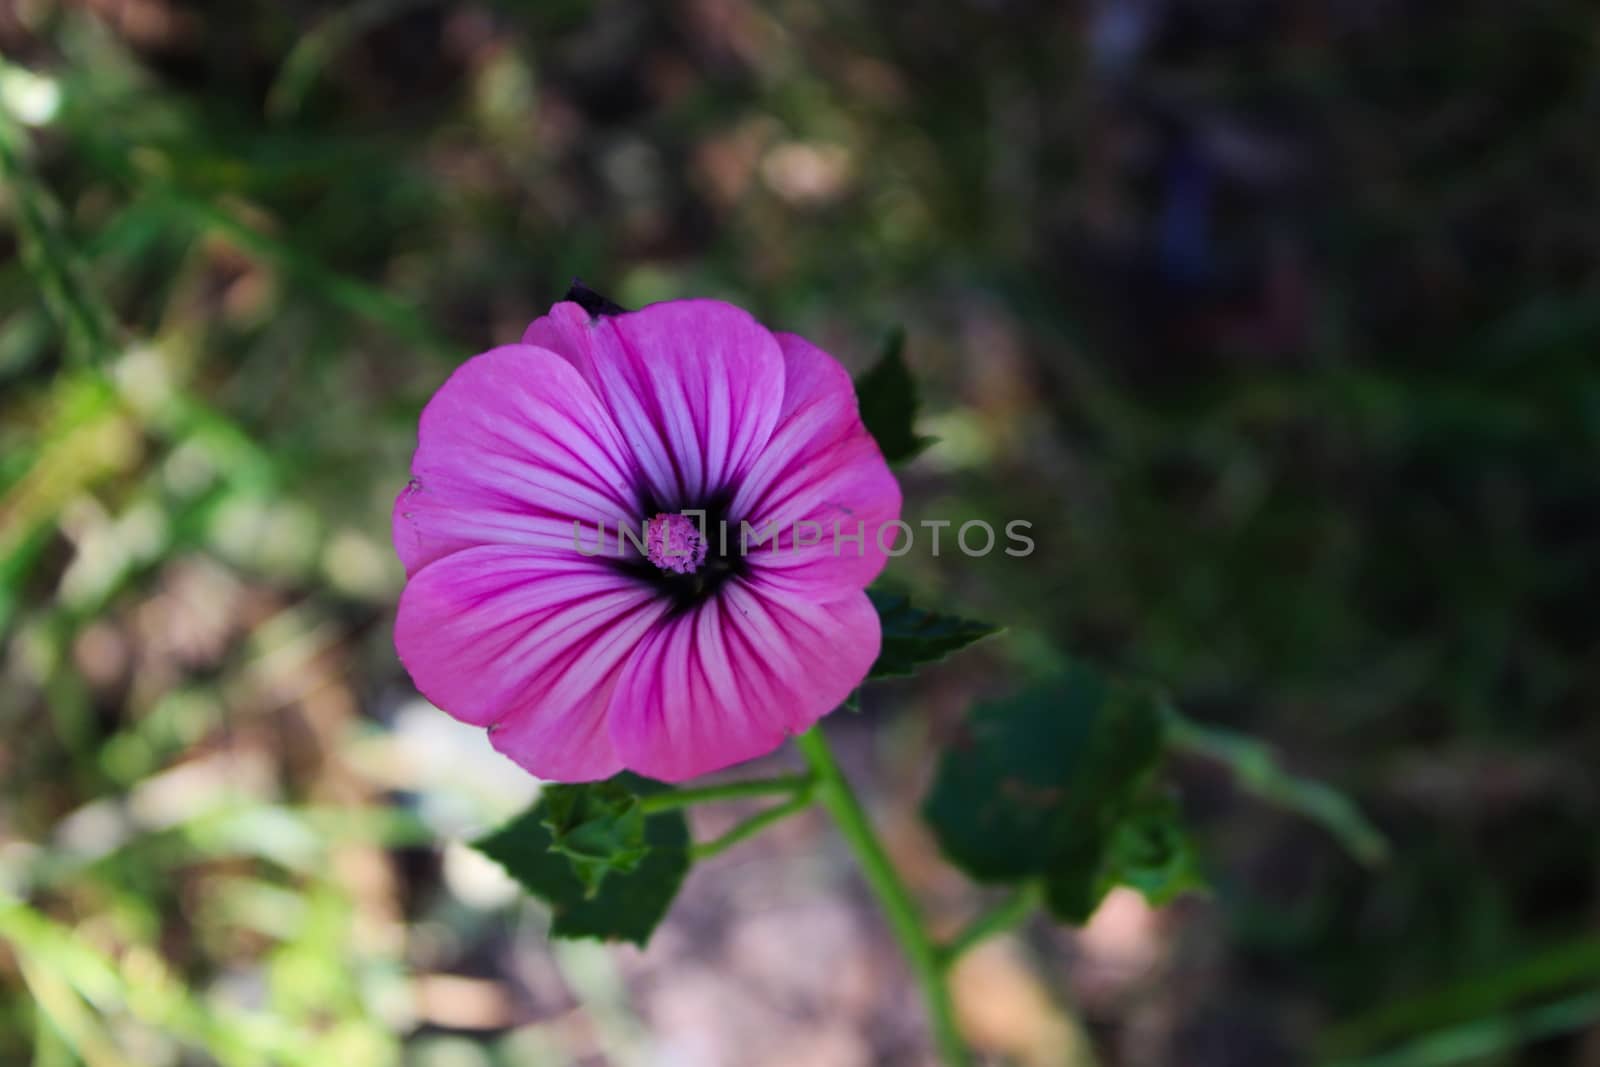 A wild geranium flower in the shadow, behind the flower there is sunlight. by mahirrov